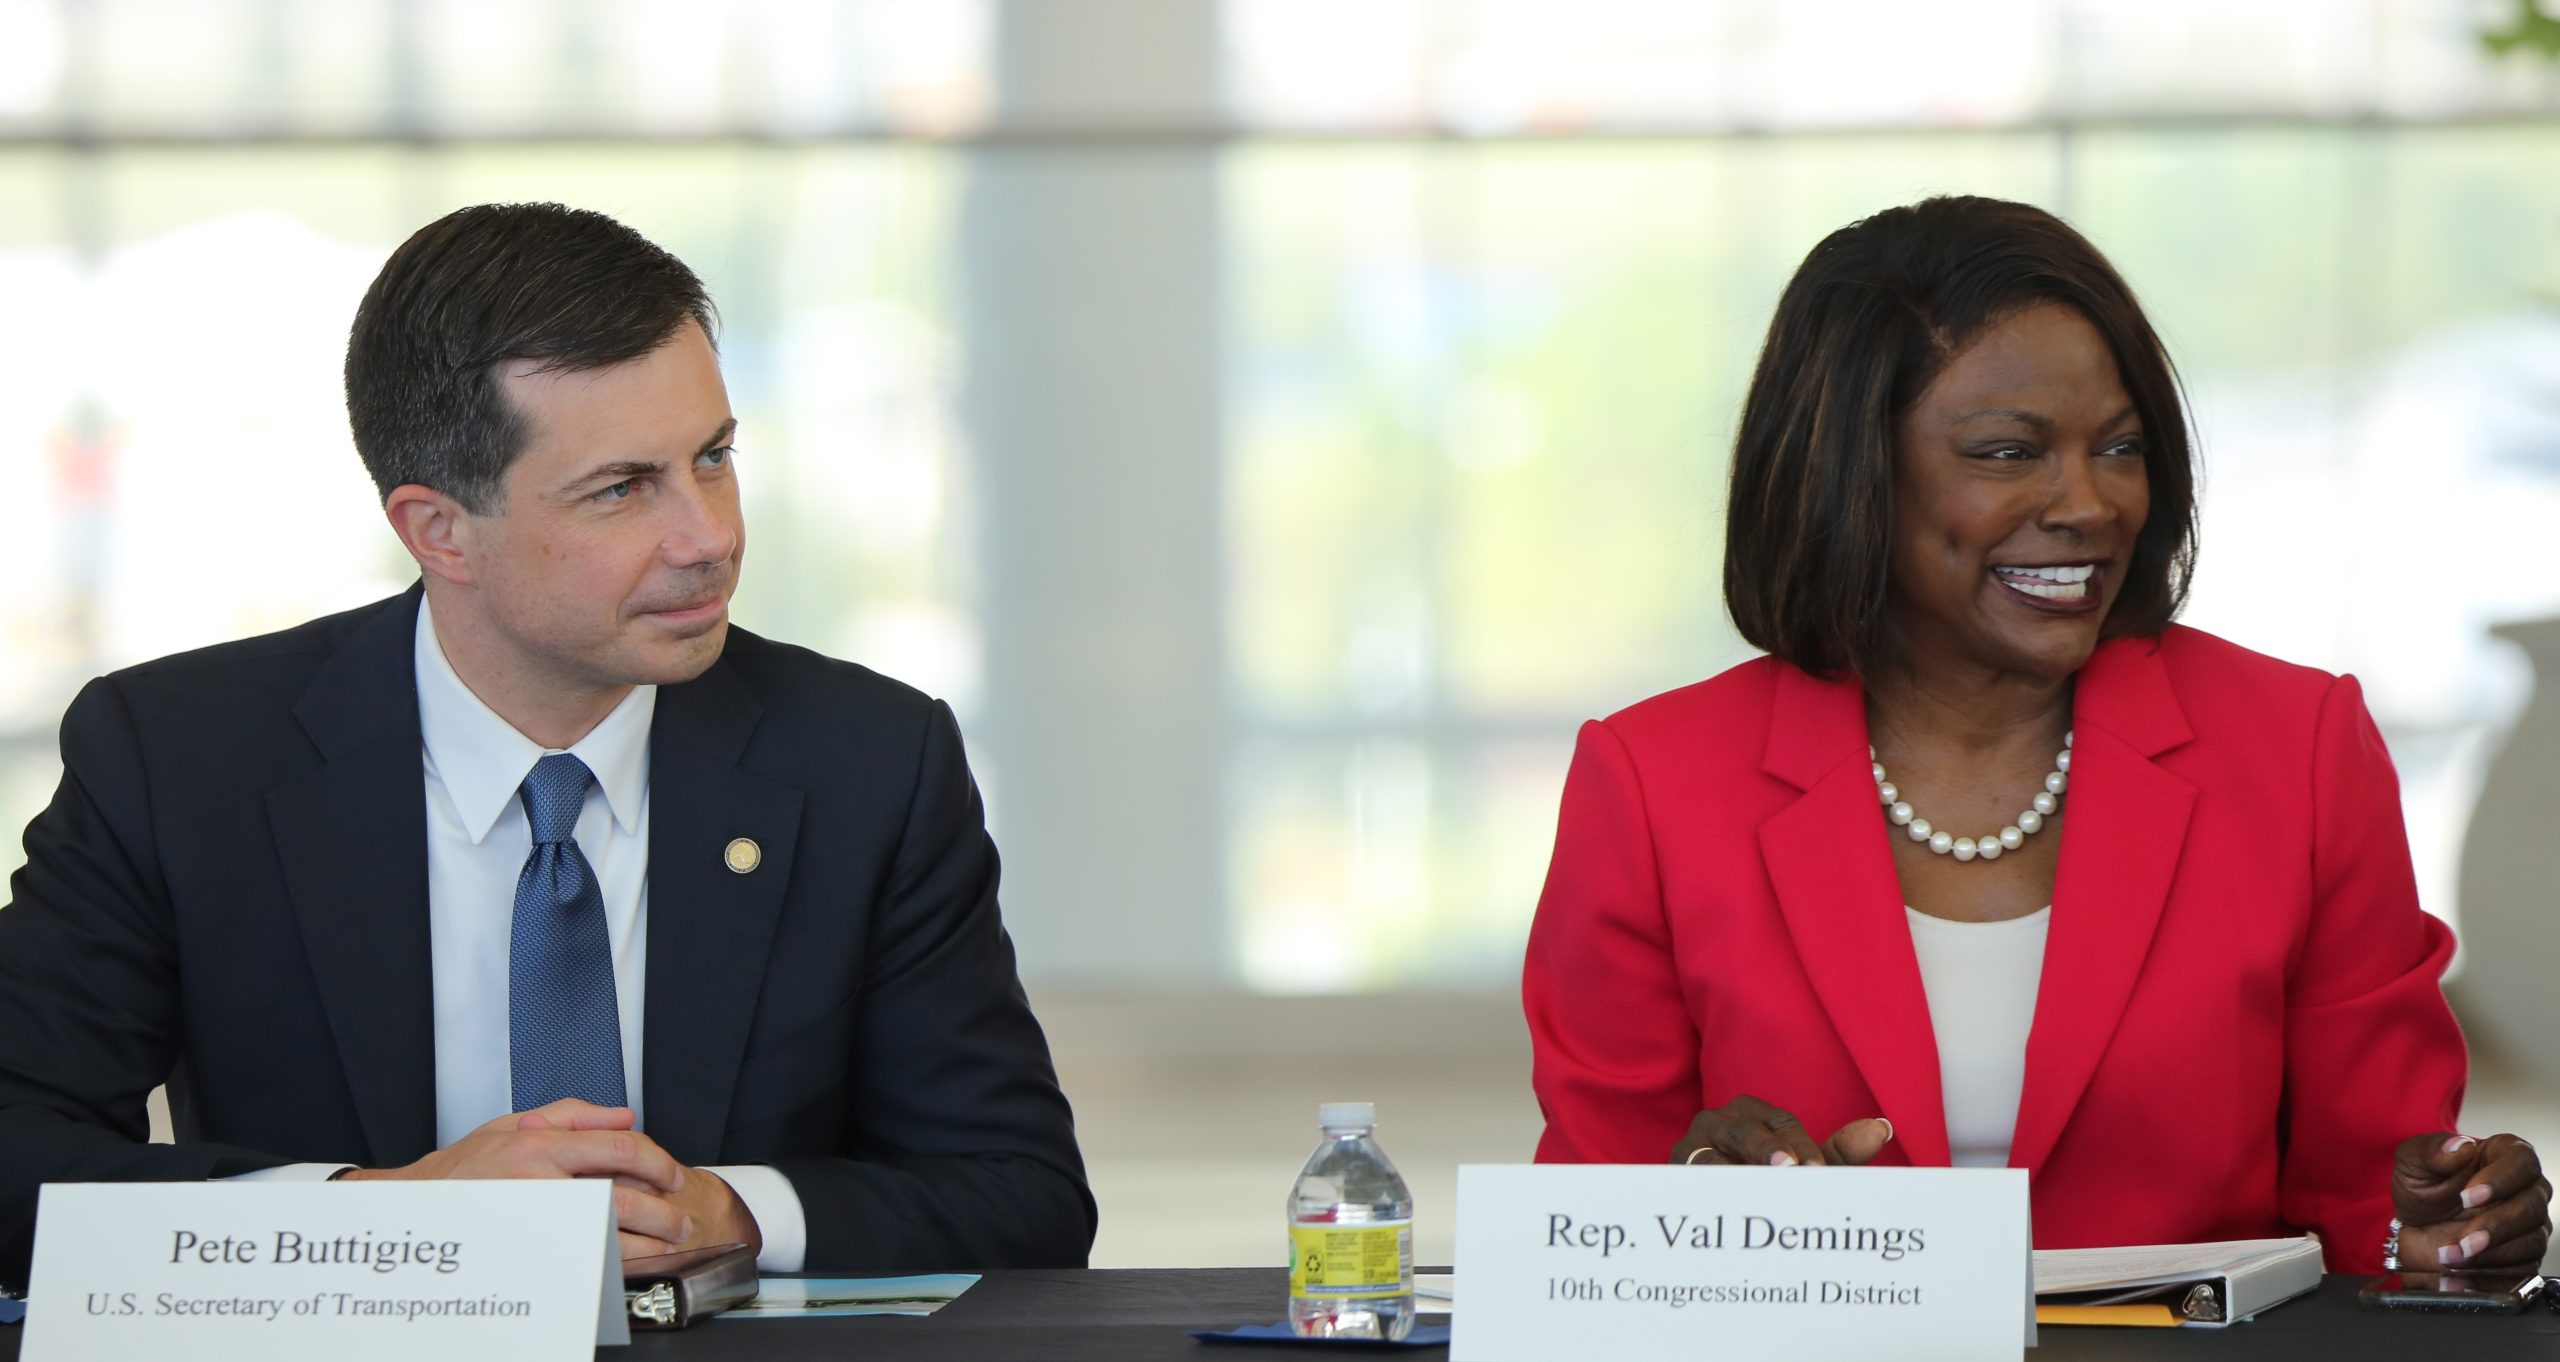 Rep. Demings and Secretary Buttigieg Discuss Bipartisan Infrastructure Law